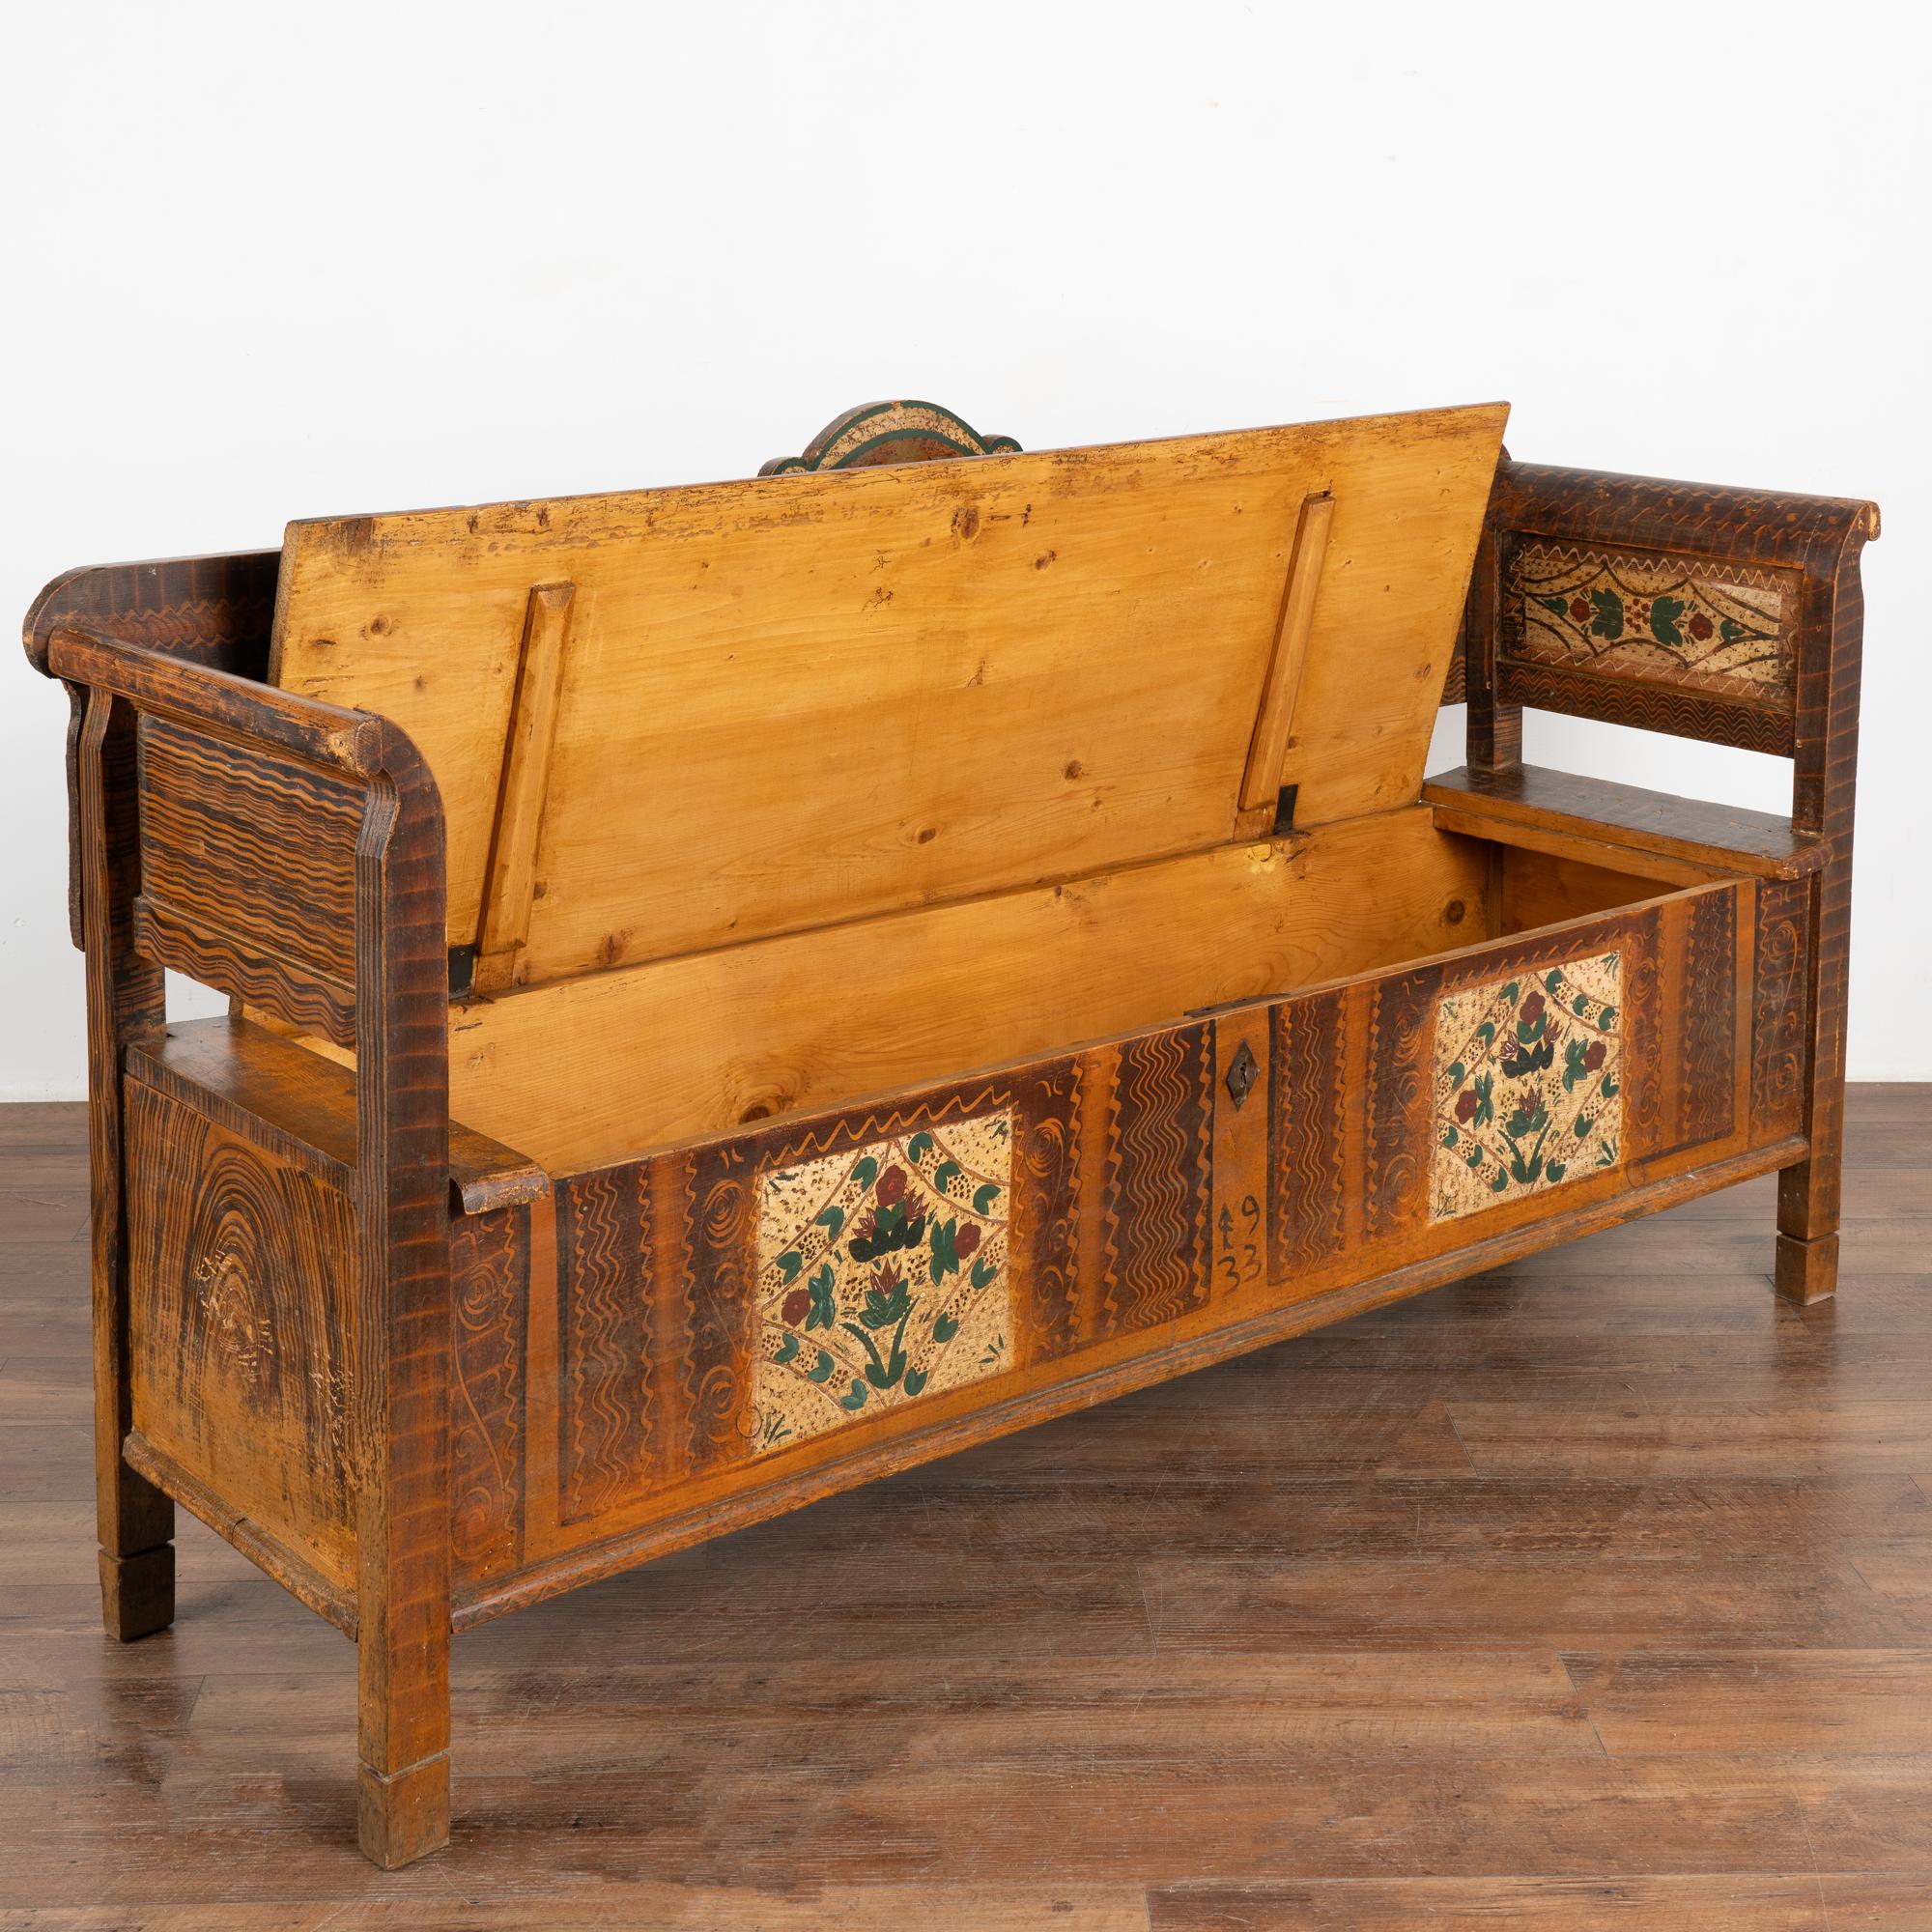 Hungarian Original Painted Folk Art Bench With Carved Birds, Hungary dated 1933 For Sale